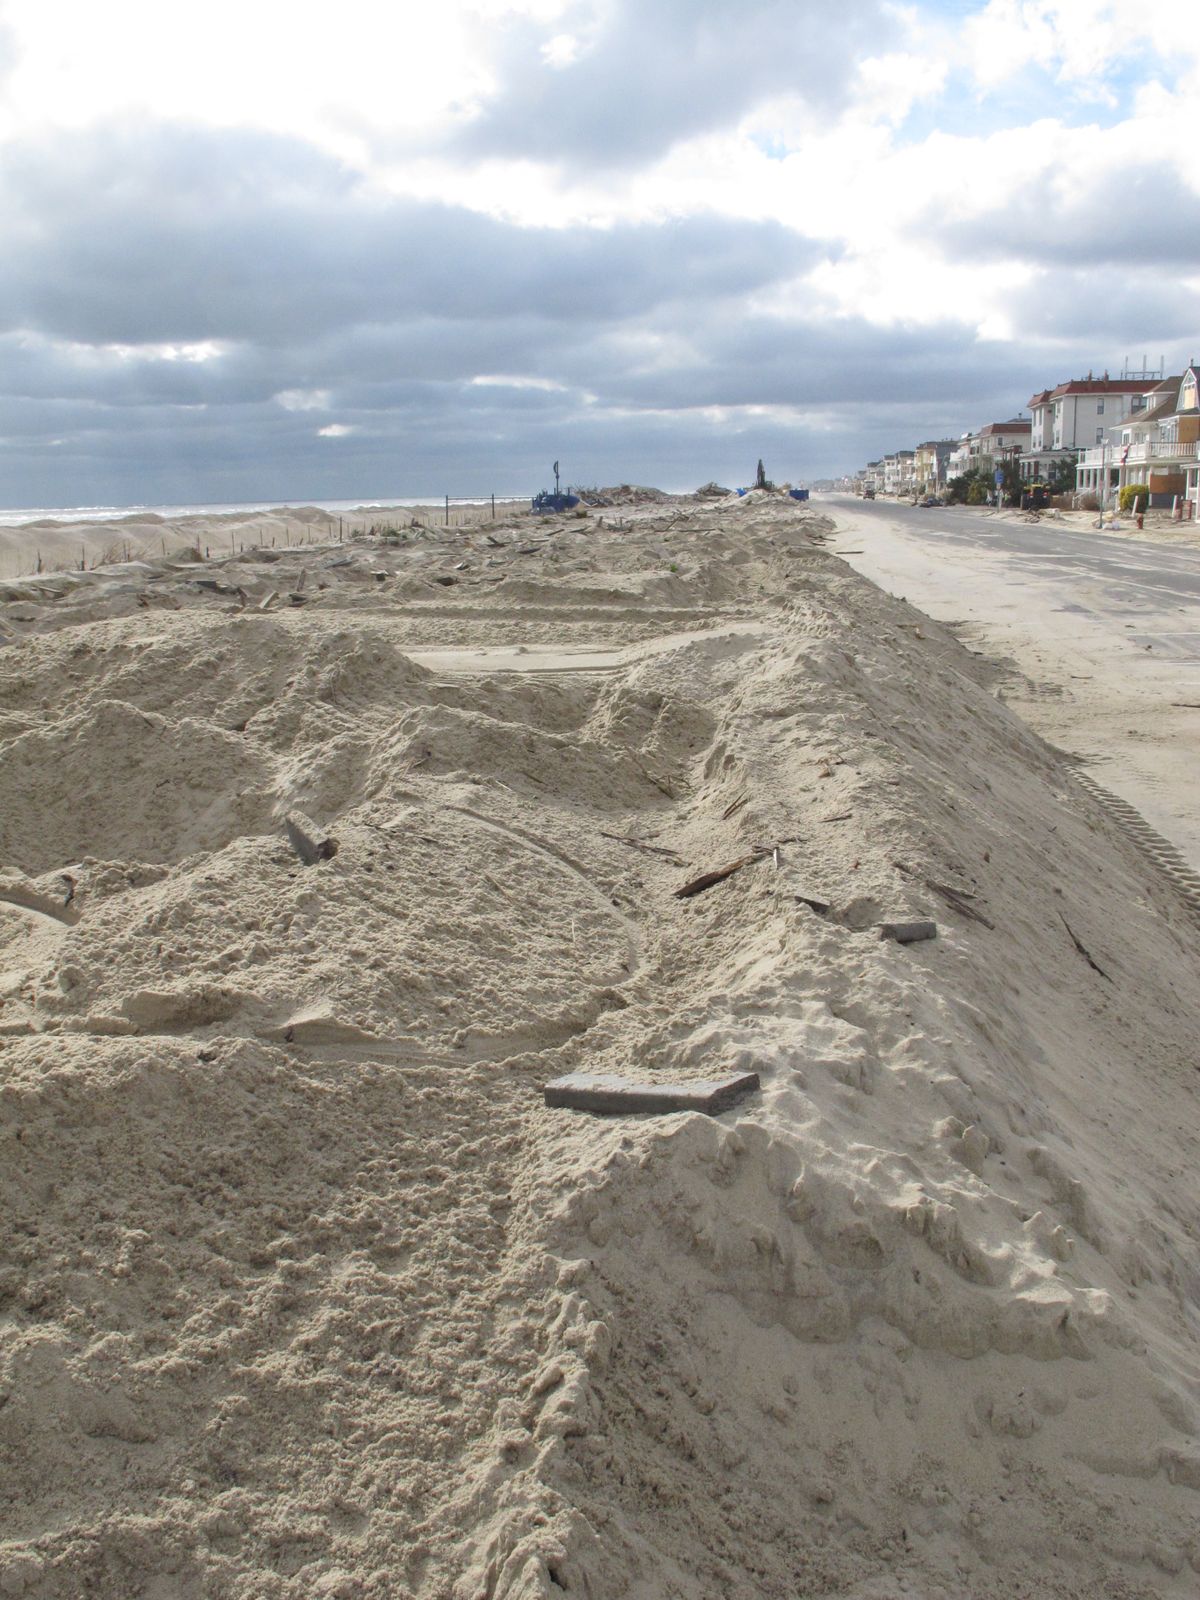 Piles of sand are all that remain where the Belmar N.J. boardwalk used to stand, in a Nov. 15, 2012 photo. Superstorm Sandy took a bite out of the Jersey shore, washing away millions of tons of sand and slimming down beaches along the state�s 127-mile coastline. (Wayne Parry / Associated Press)